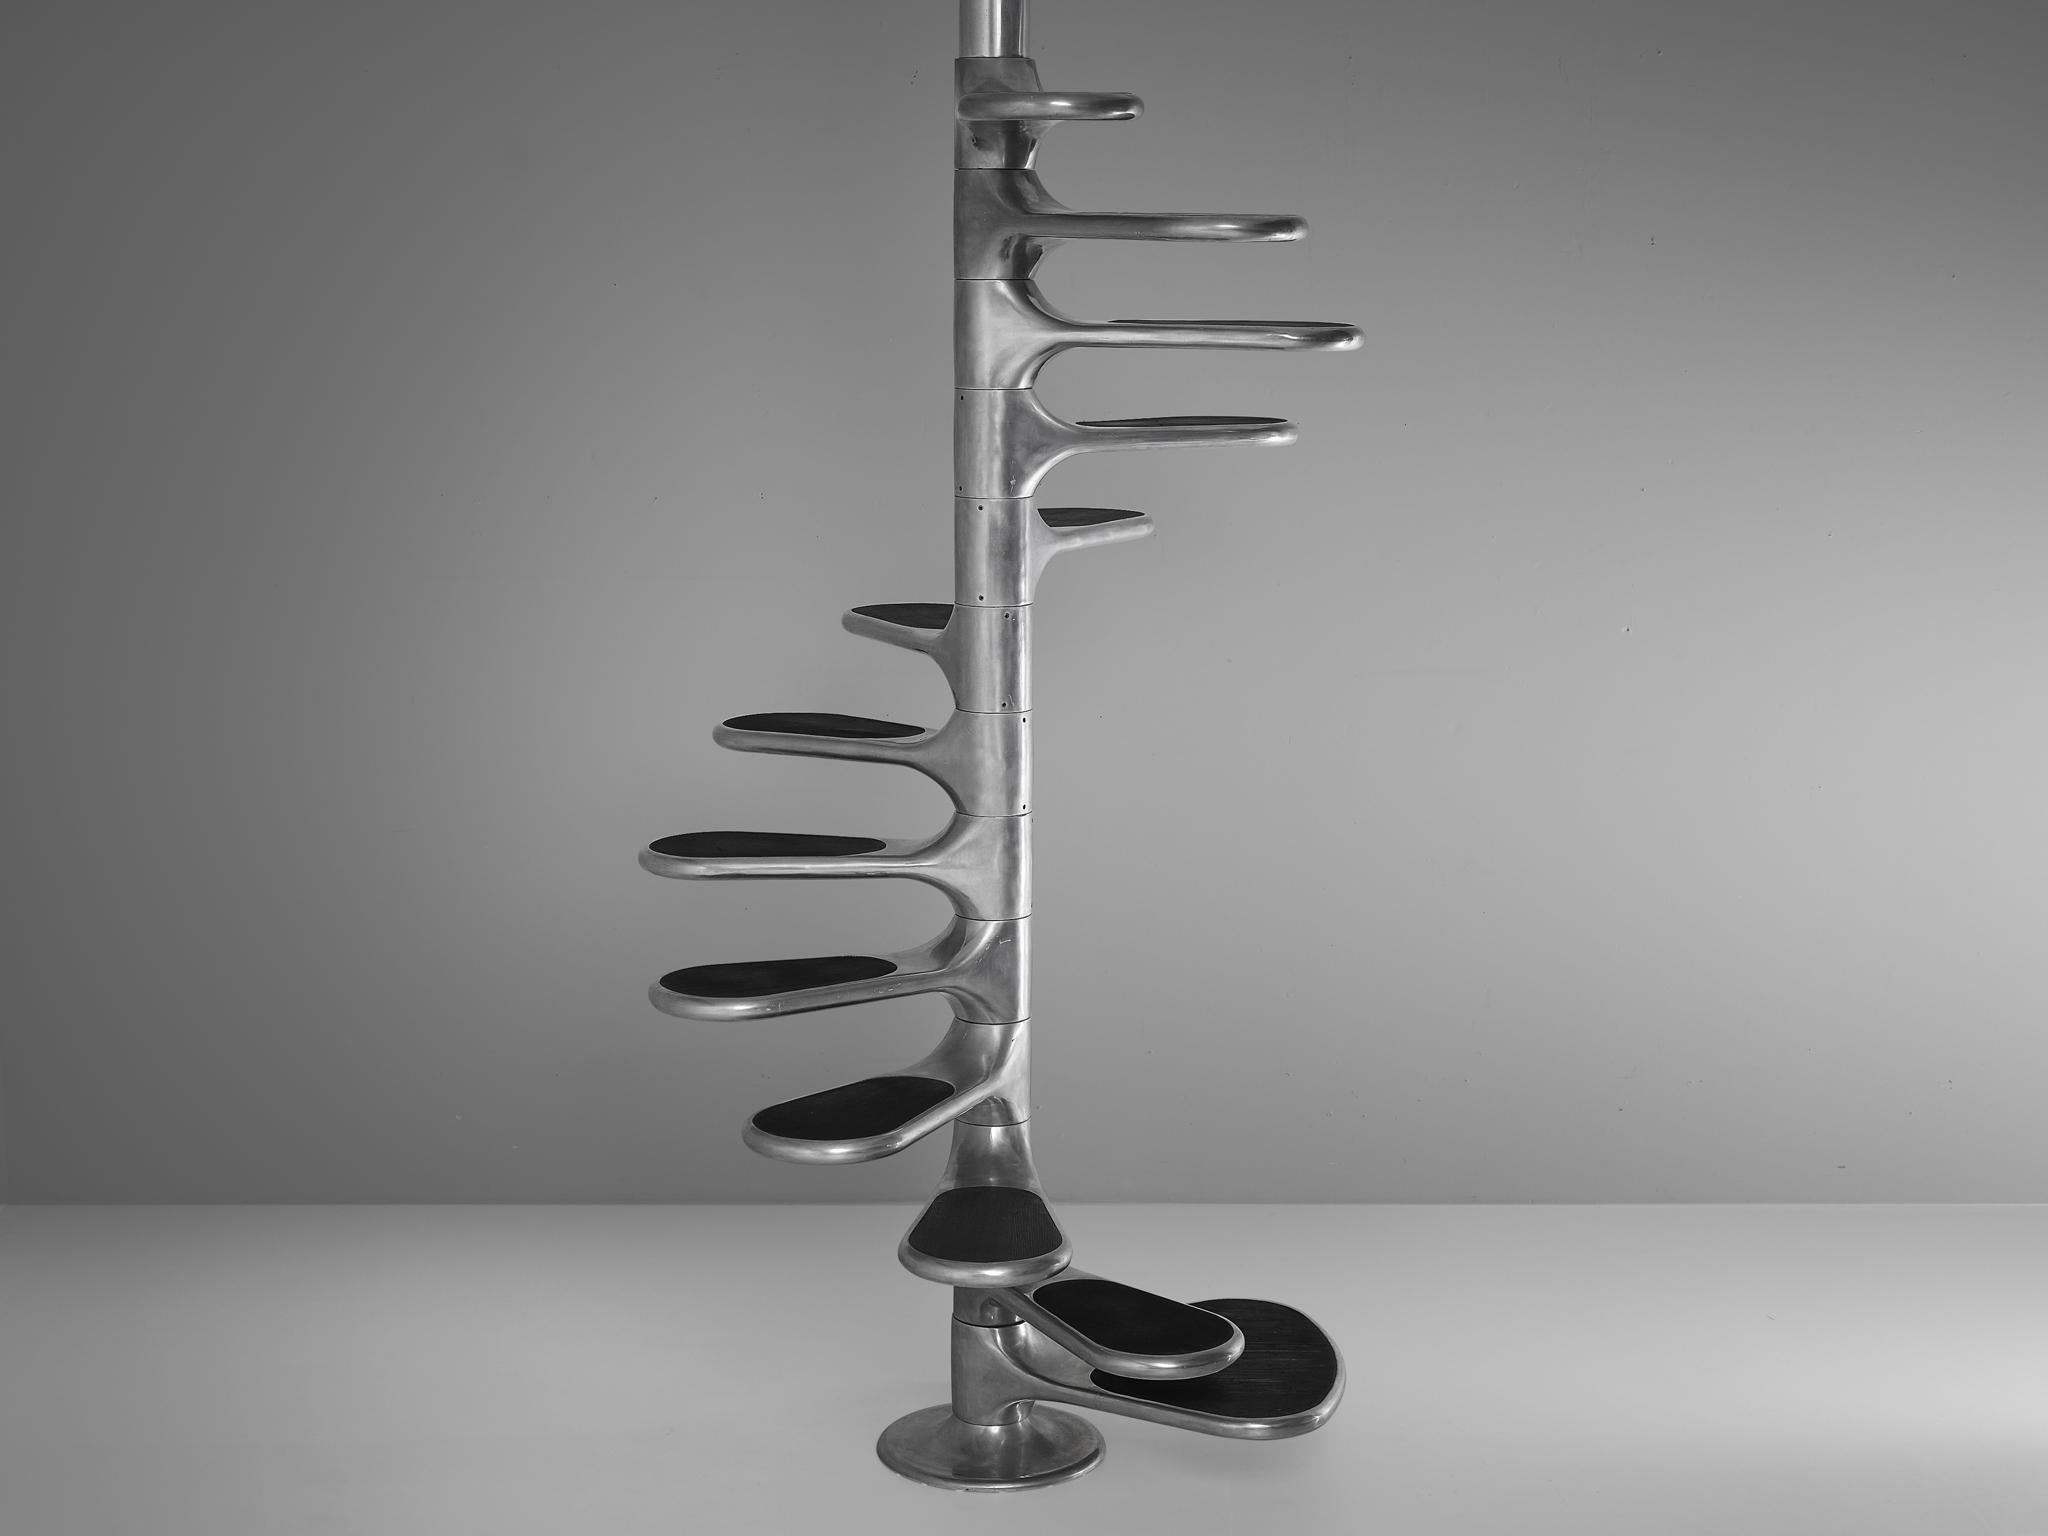 Roger Tallon for Galerie Lacloche, 'Helicoid' staircase, aluminum, rubber, France, design 1964, production 1960s

This striking staircase with a rubber step surface is called the 'Helicloid' staircase and is part of the 